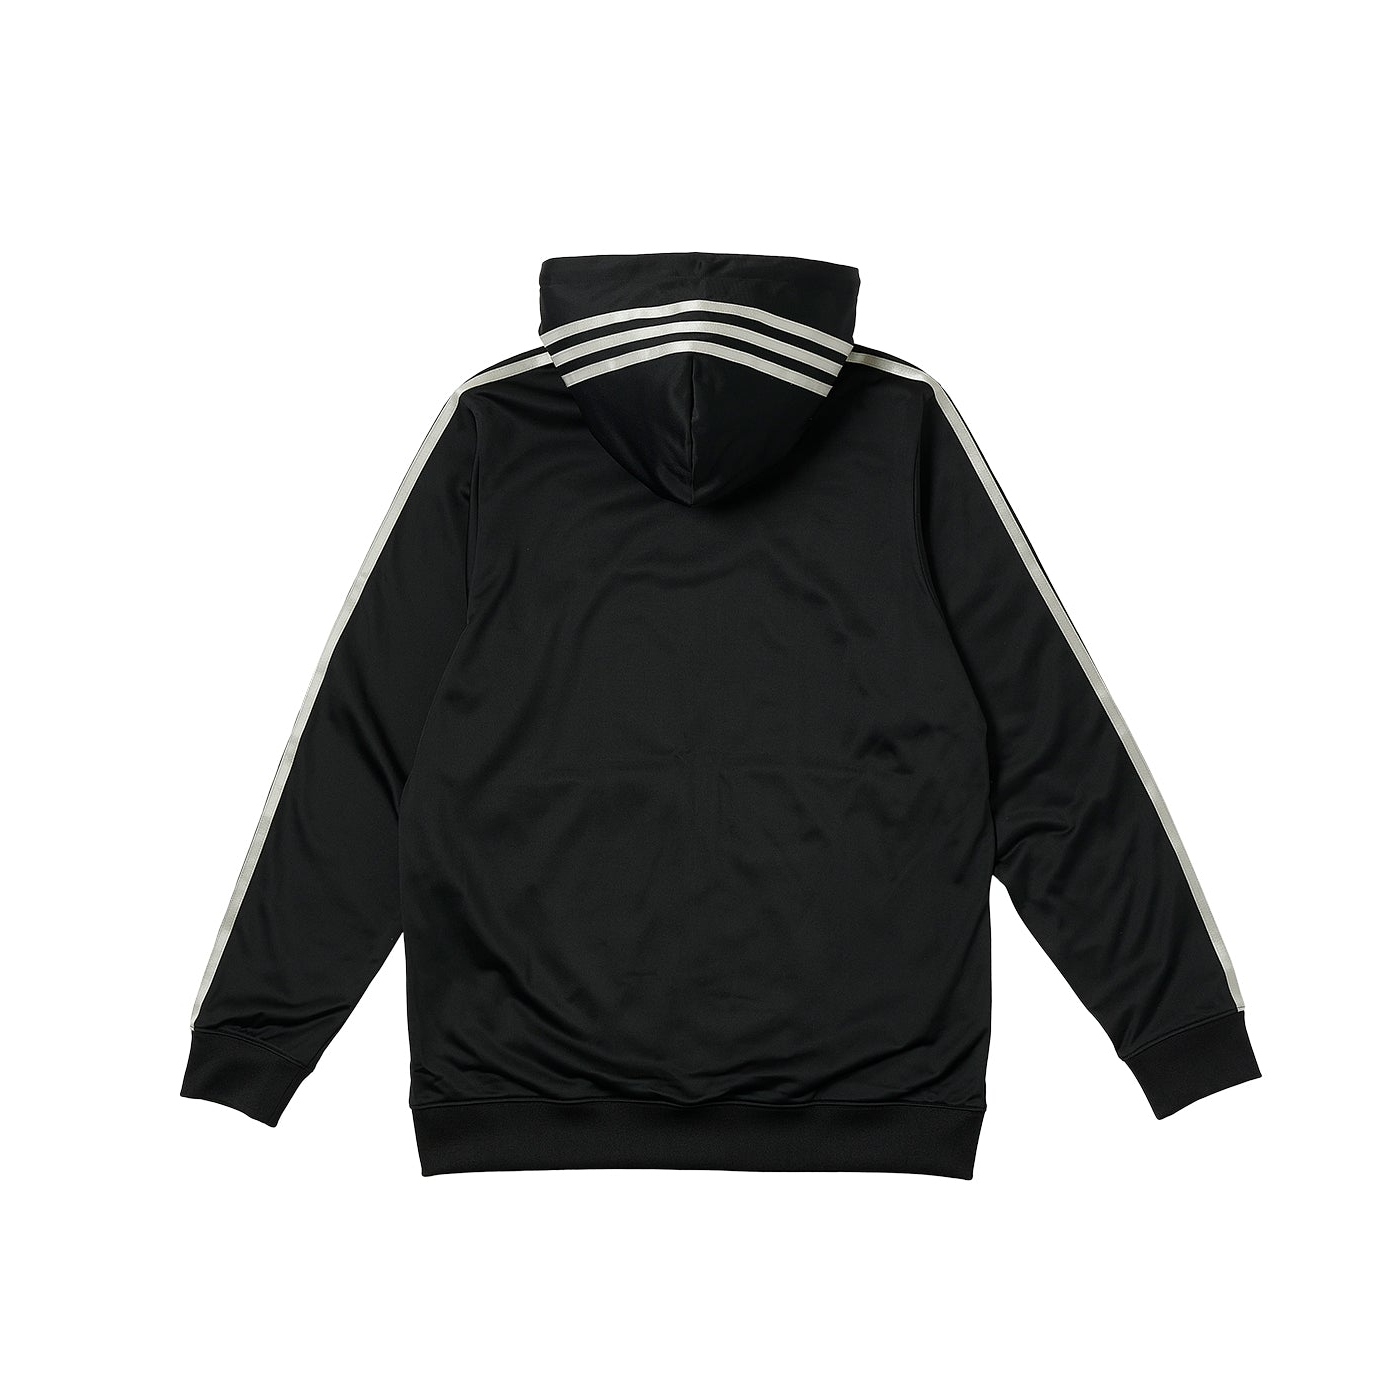 Thumbnail ADIDAS PALACE HOODED FIREBIRD TRACK TOP BLACK one color